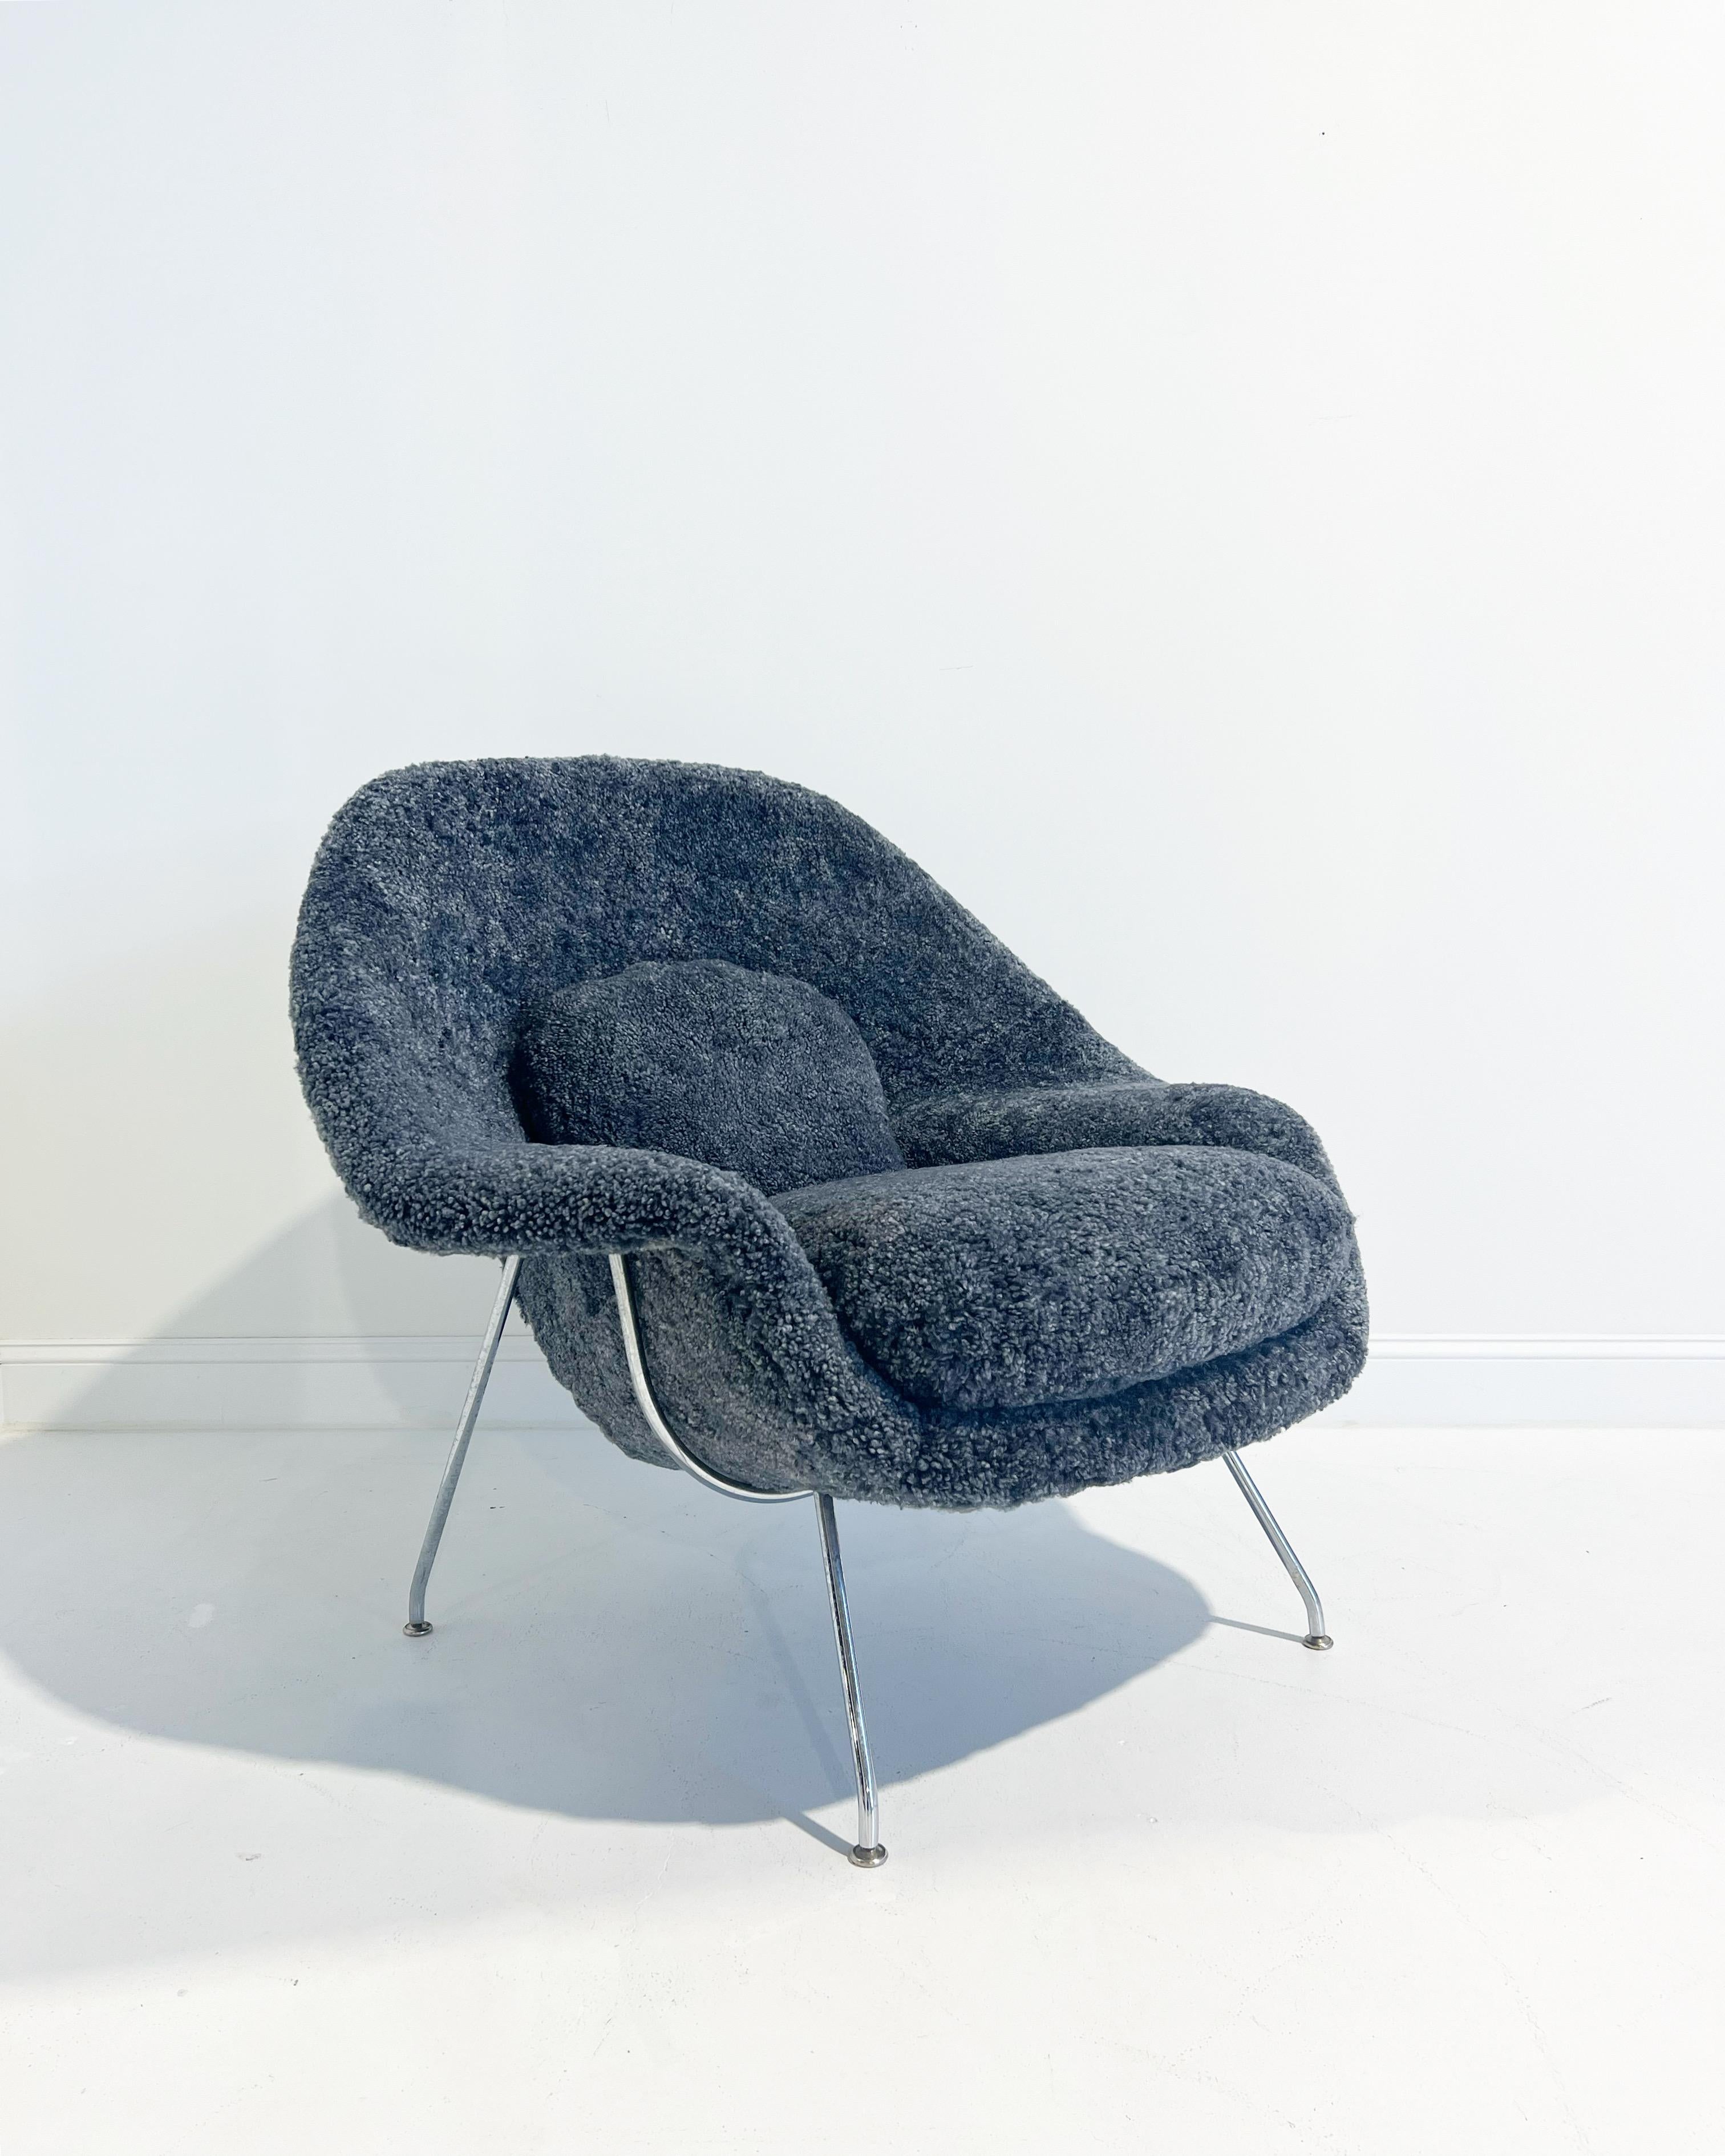 Forsyth Bespoke Eero Saarinen Womb Chair and Ottoman in Shearling For Sale 3